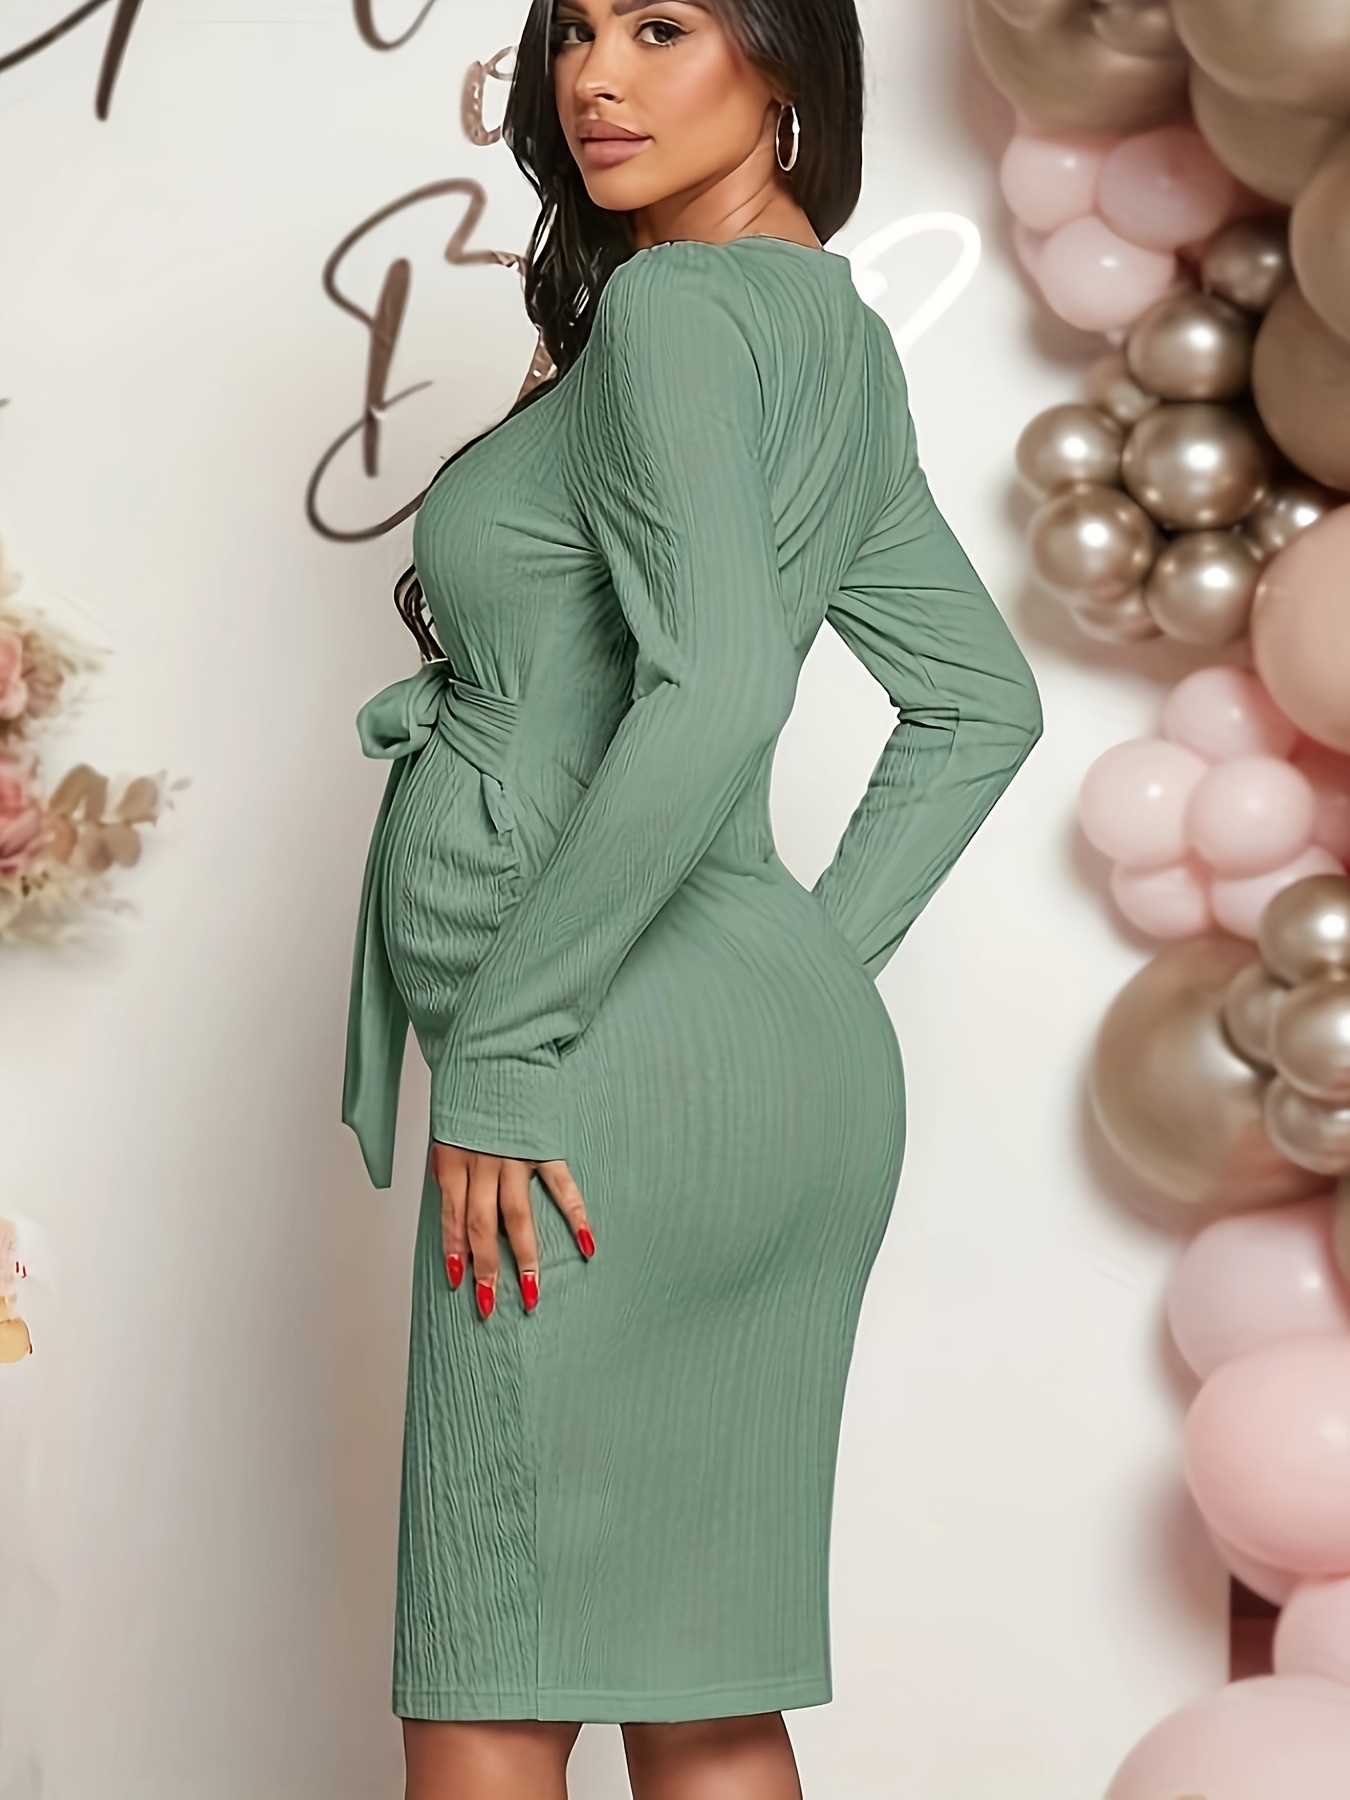 Plus Size Prom Dresses Hooded Ruffles Pregnant Women Sexy Photo Dress Front  Split Maternity Lingerie Photo Shoot or Baby Shower